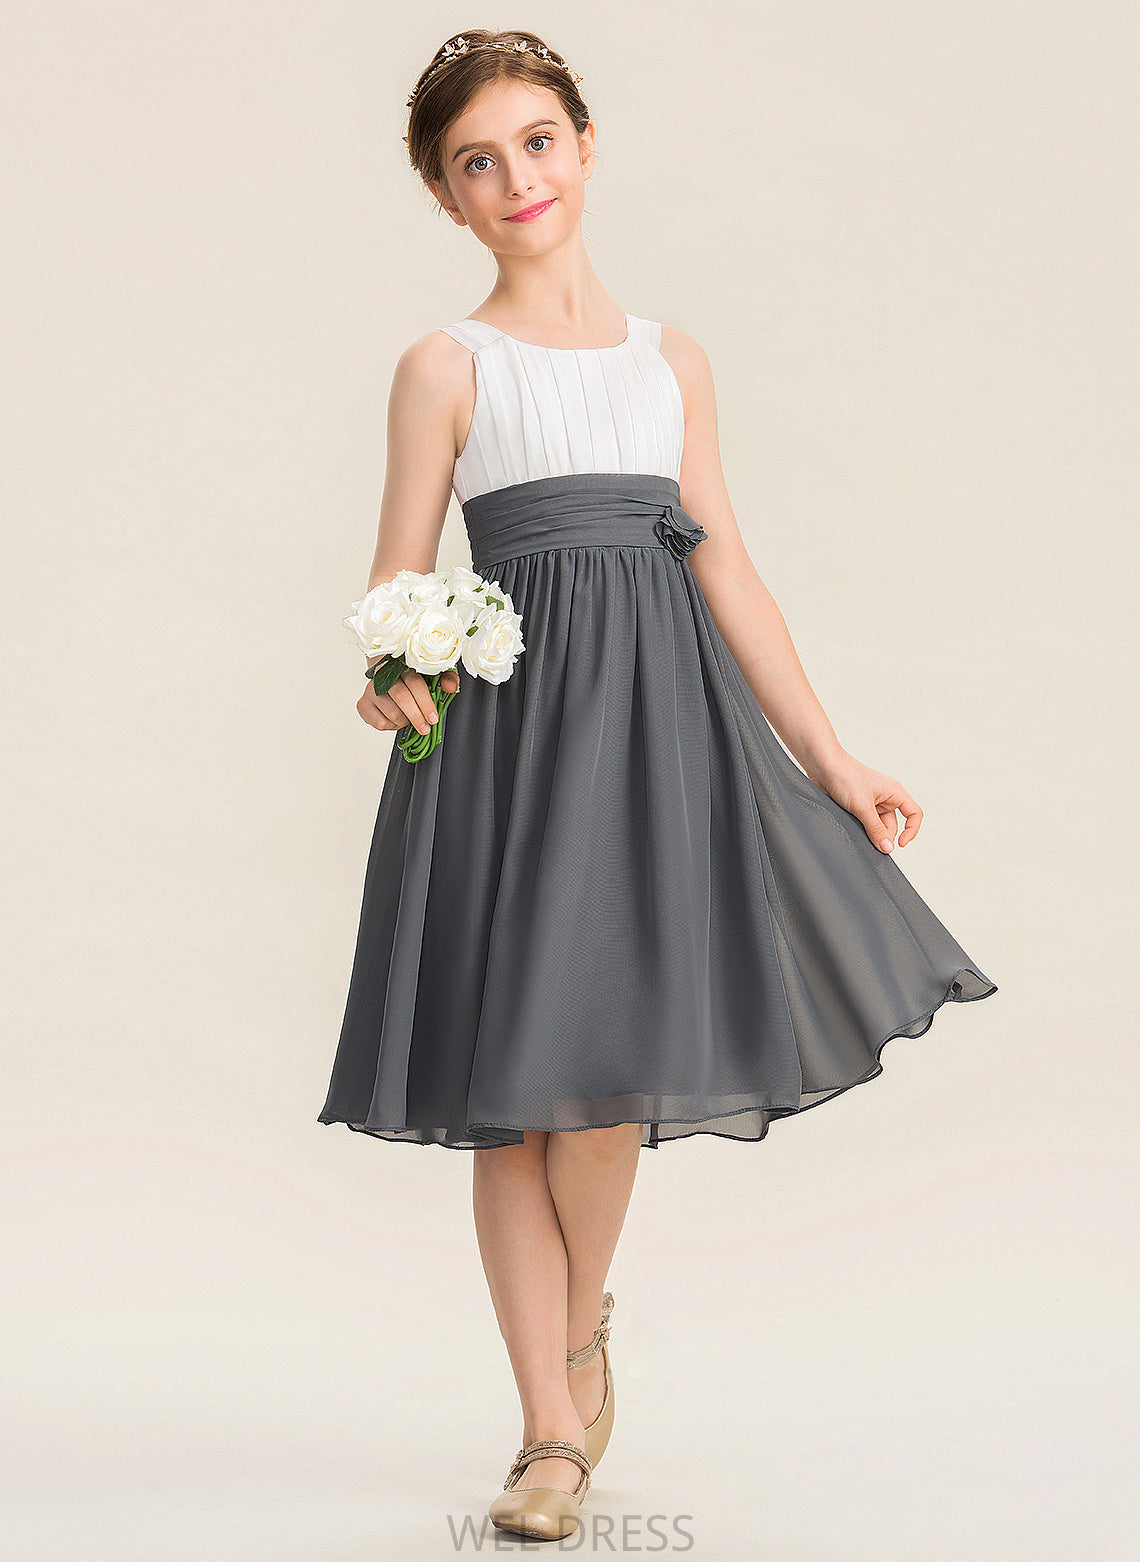 Flower(s) A-Line Junior Bridesmaid Dresses Ruffle Knee-Length Scoop With Chiffon Neck Courtney